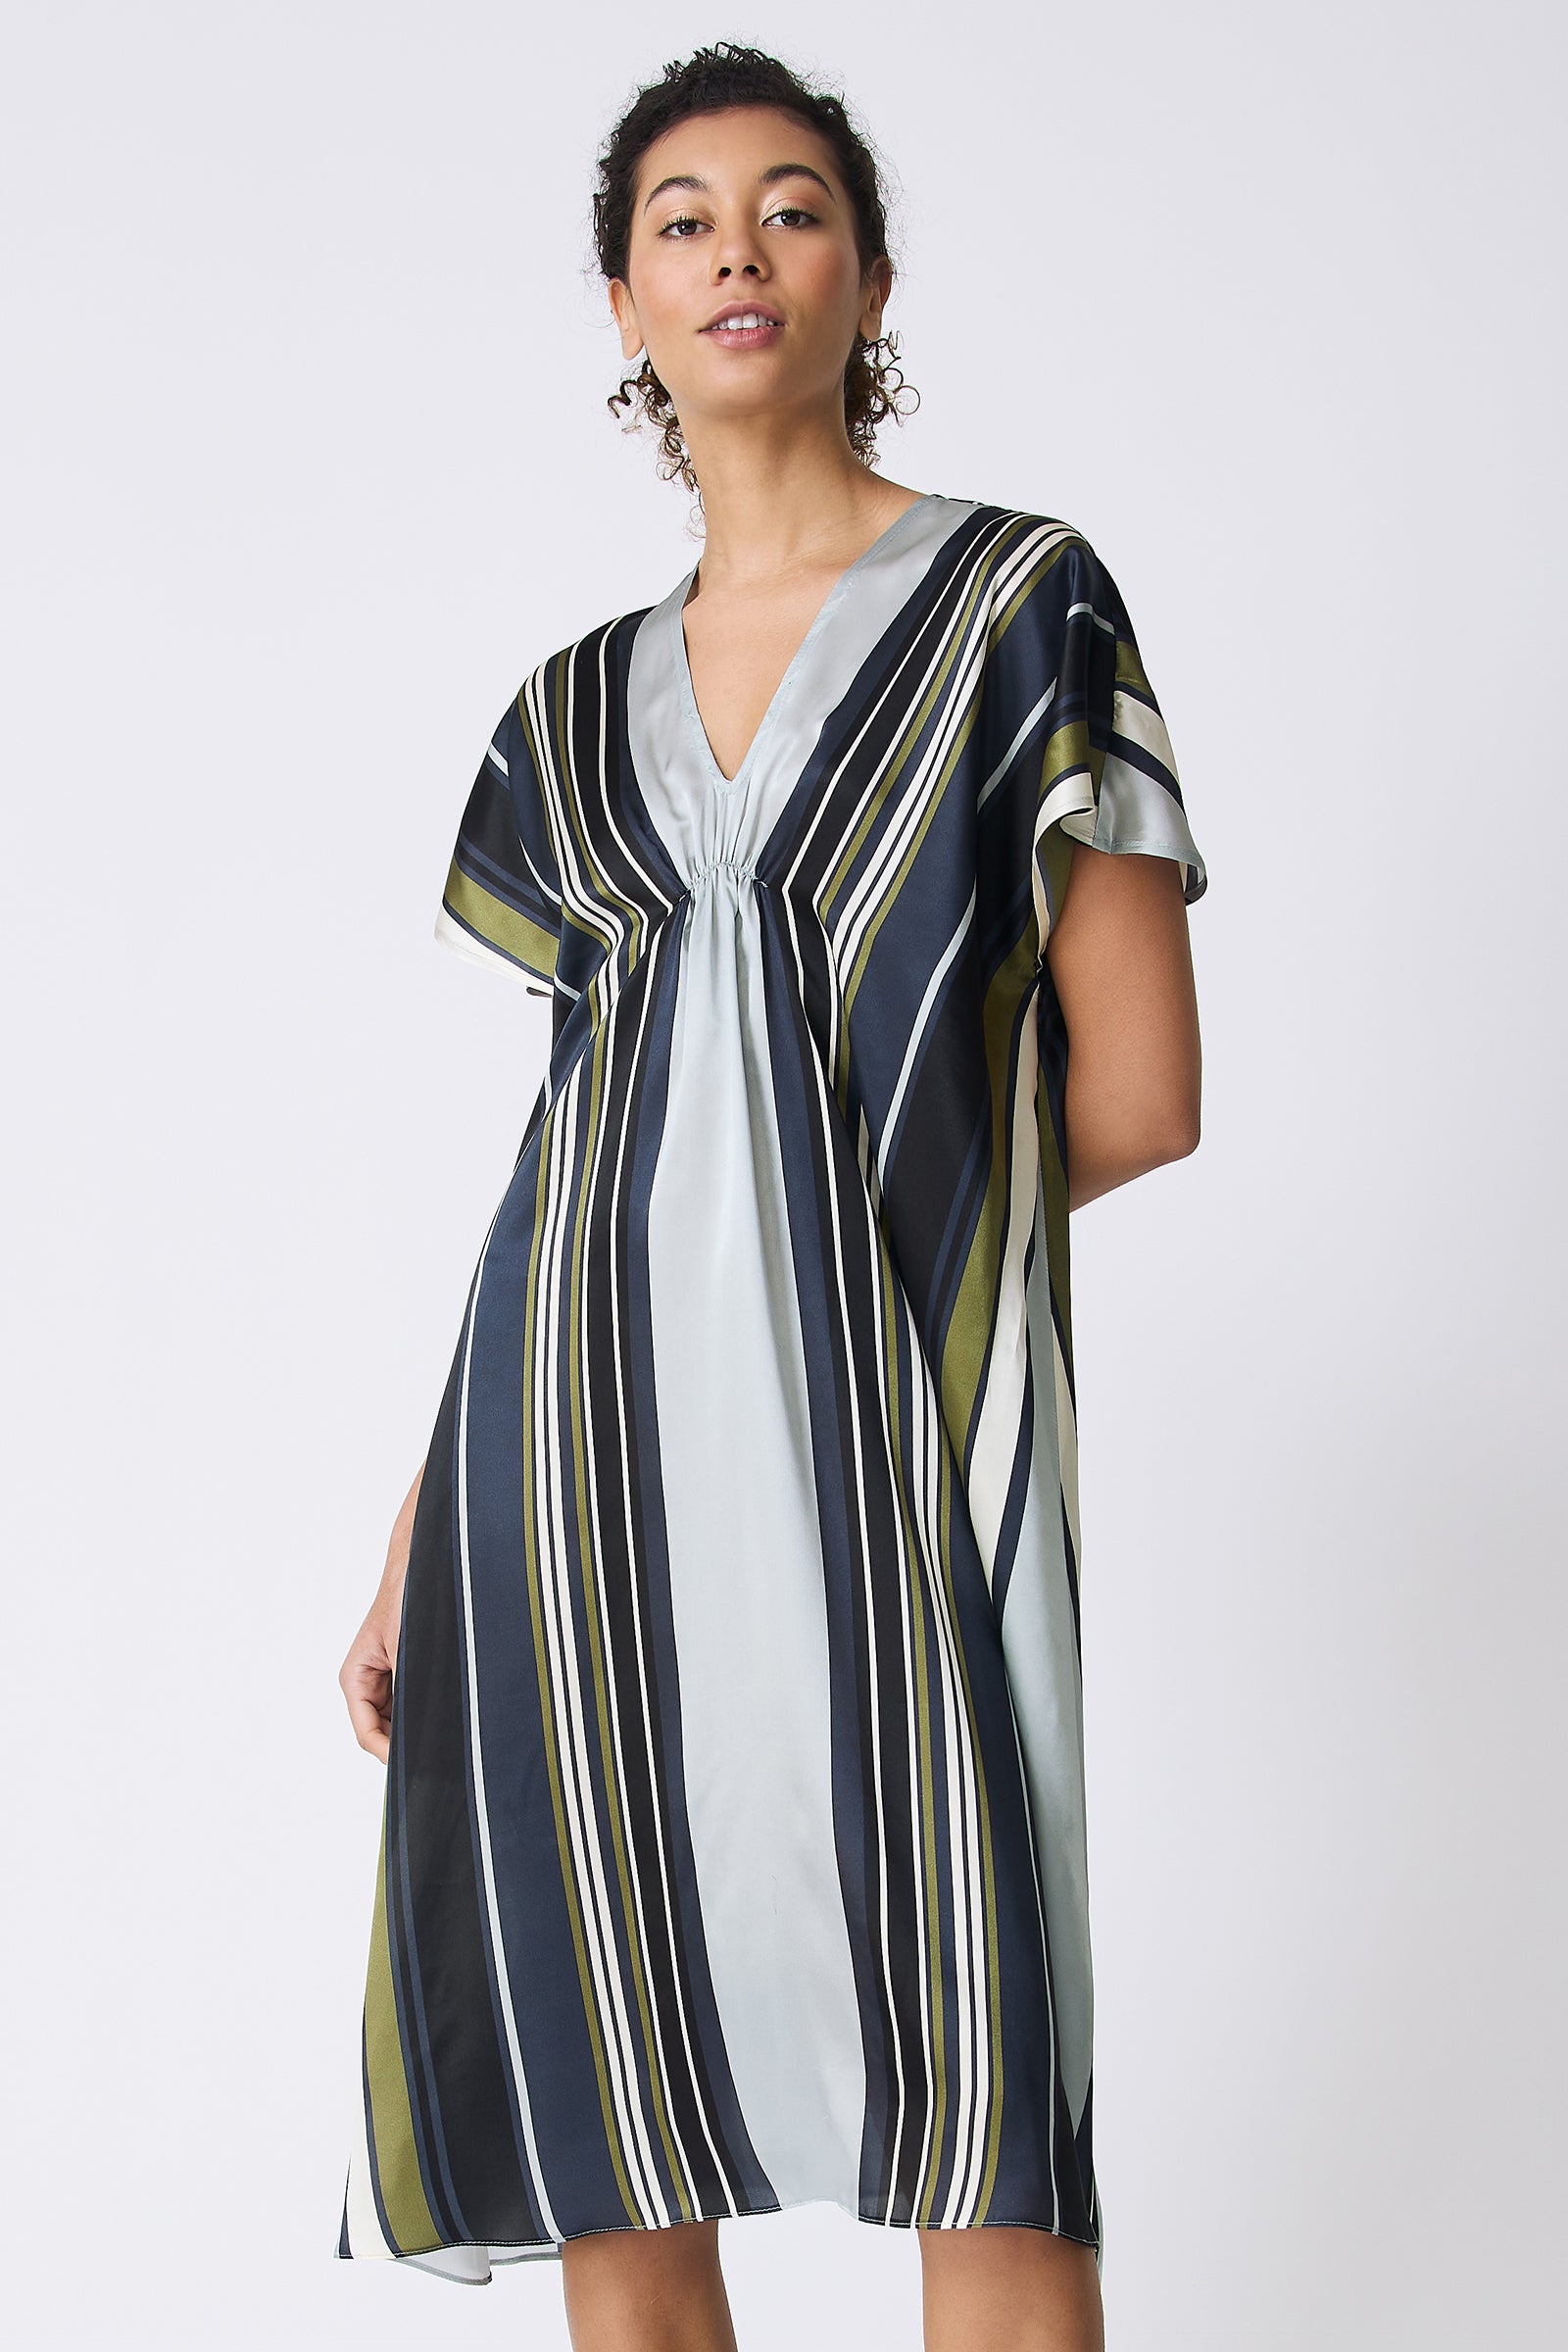 Kal Rieman Vanna Gather Front Dress in Multi Stripe on model with chin up front view